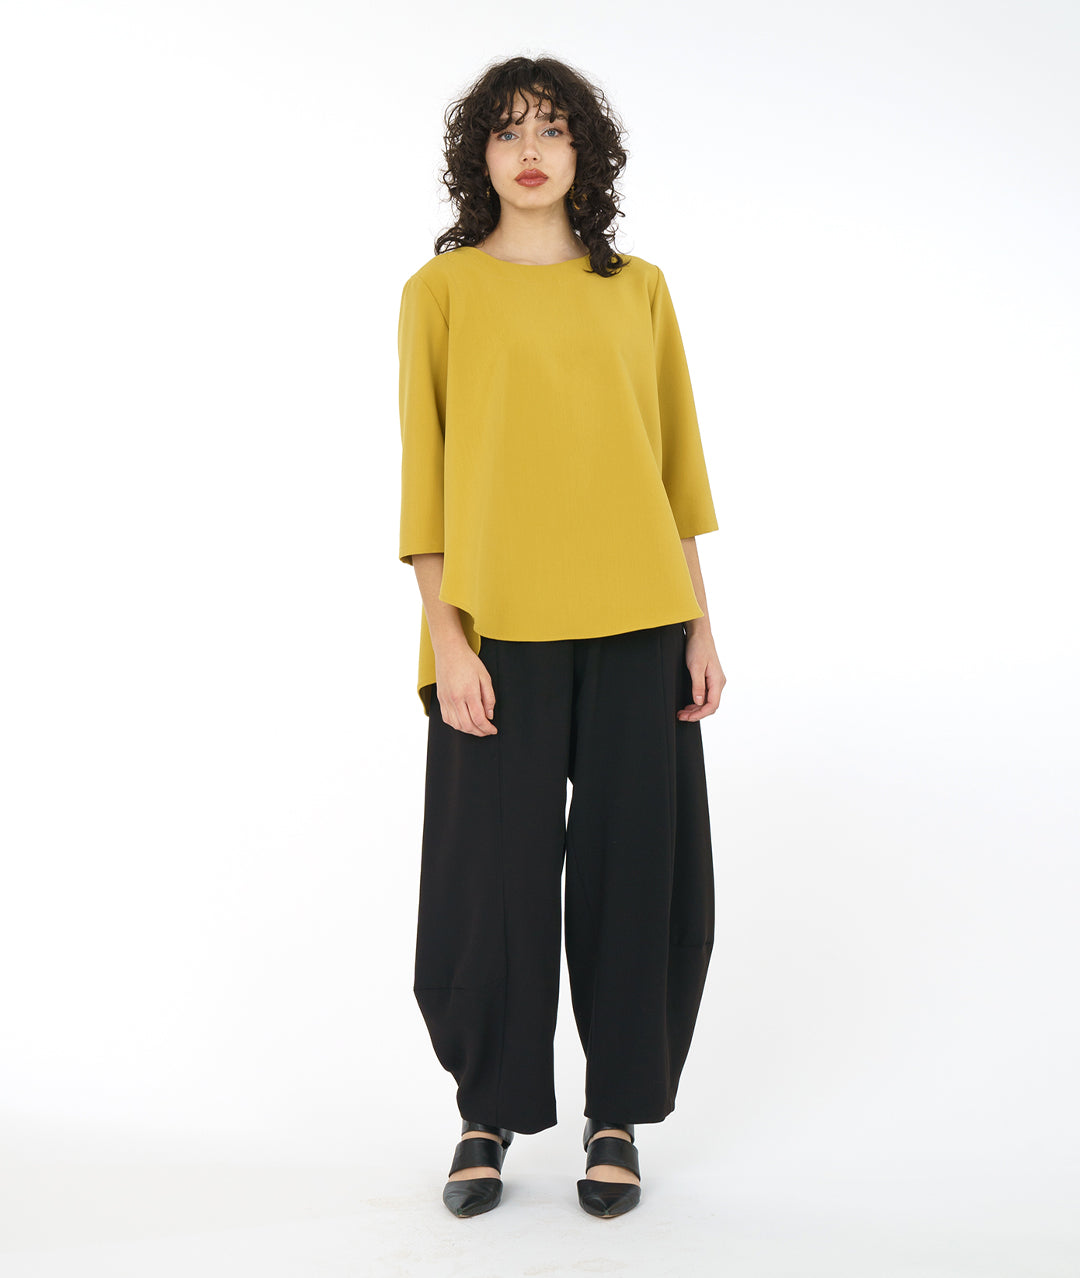 model in a high-low hemmed gold pullover top, with a black pant with a full leg tapering down at the ankle